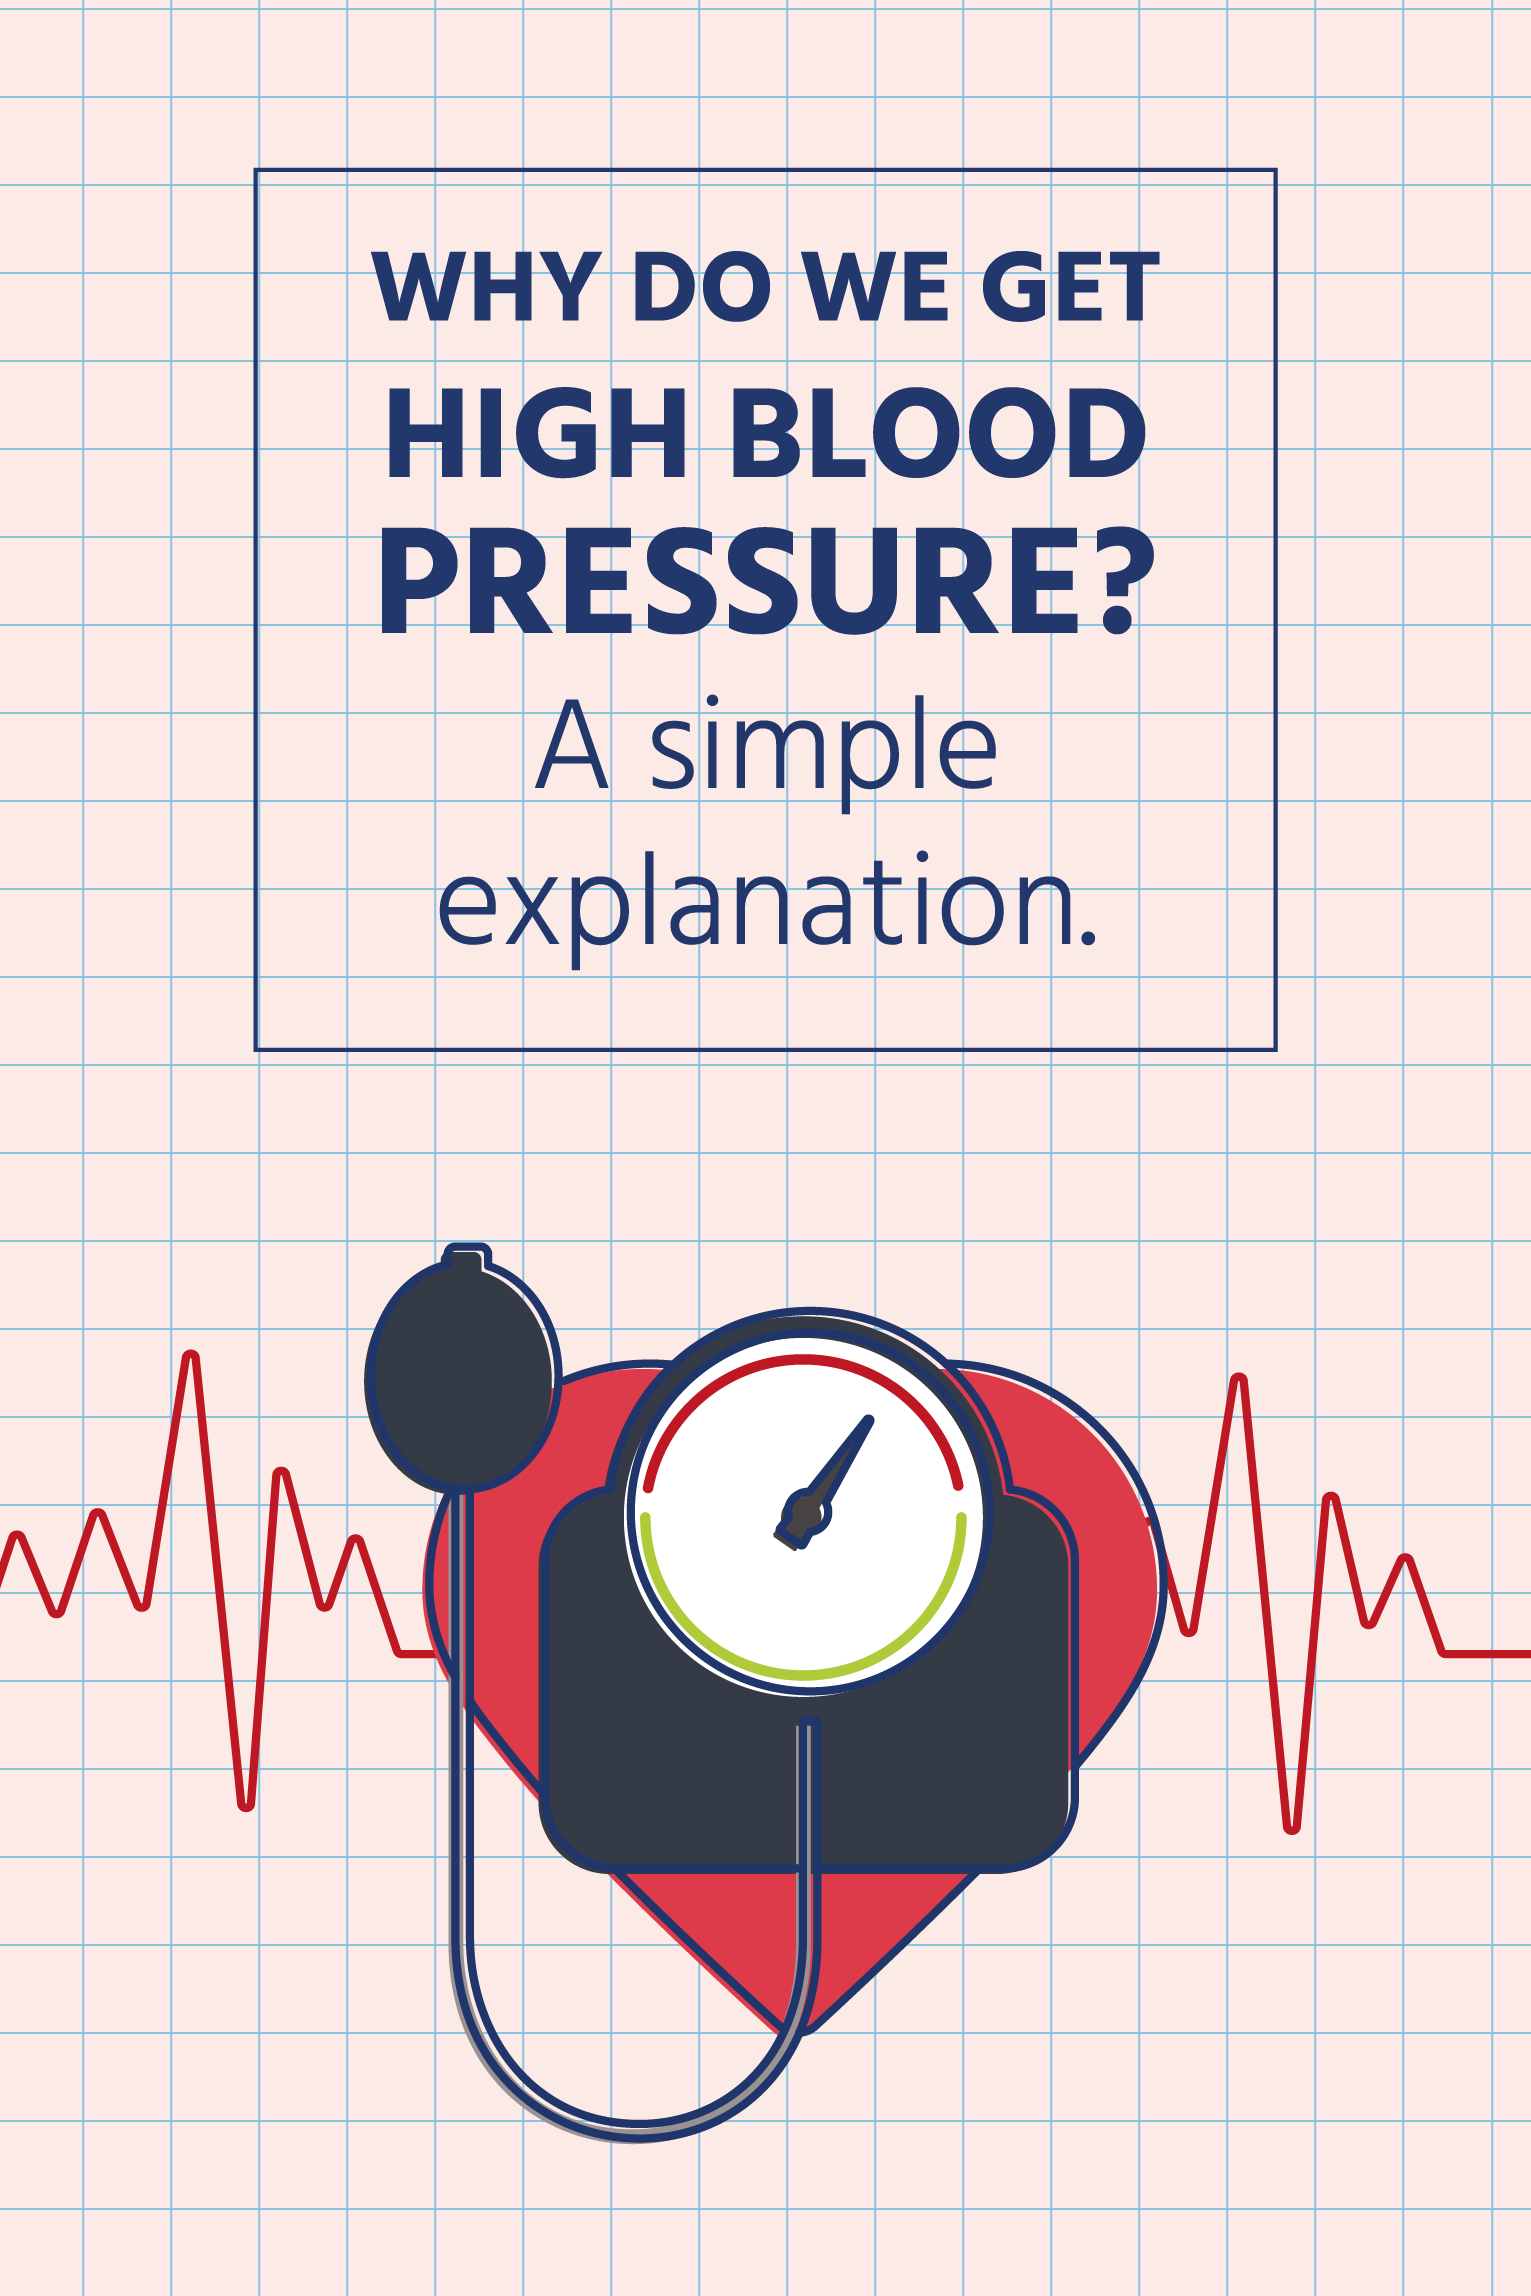 Why do we get high blood pressure? A simple explanation.